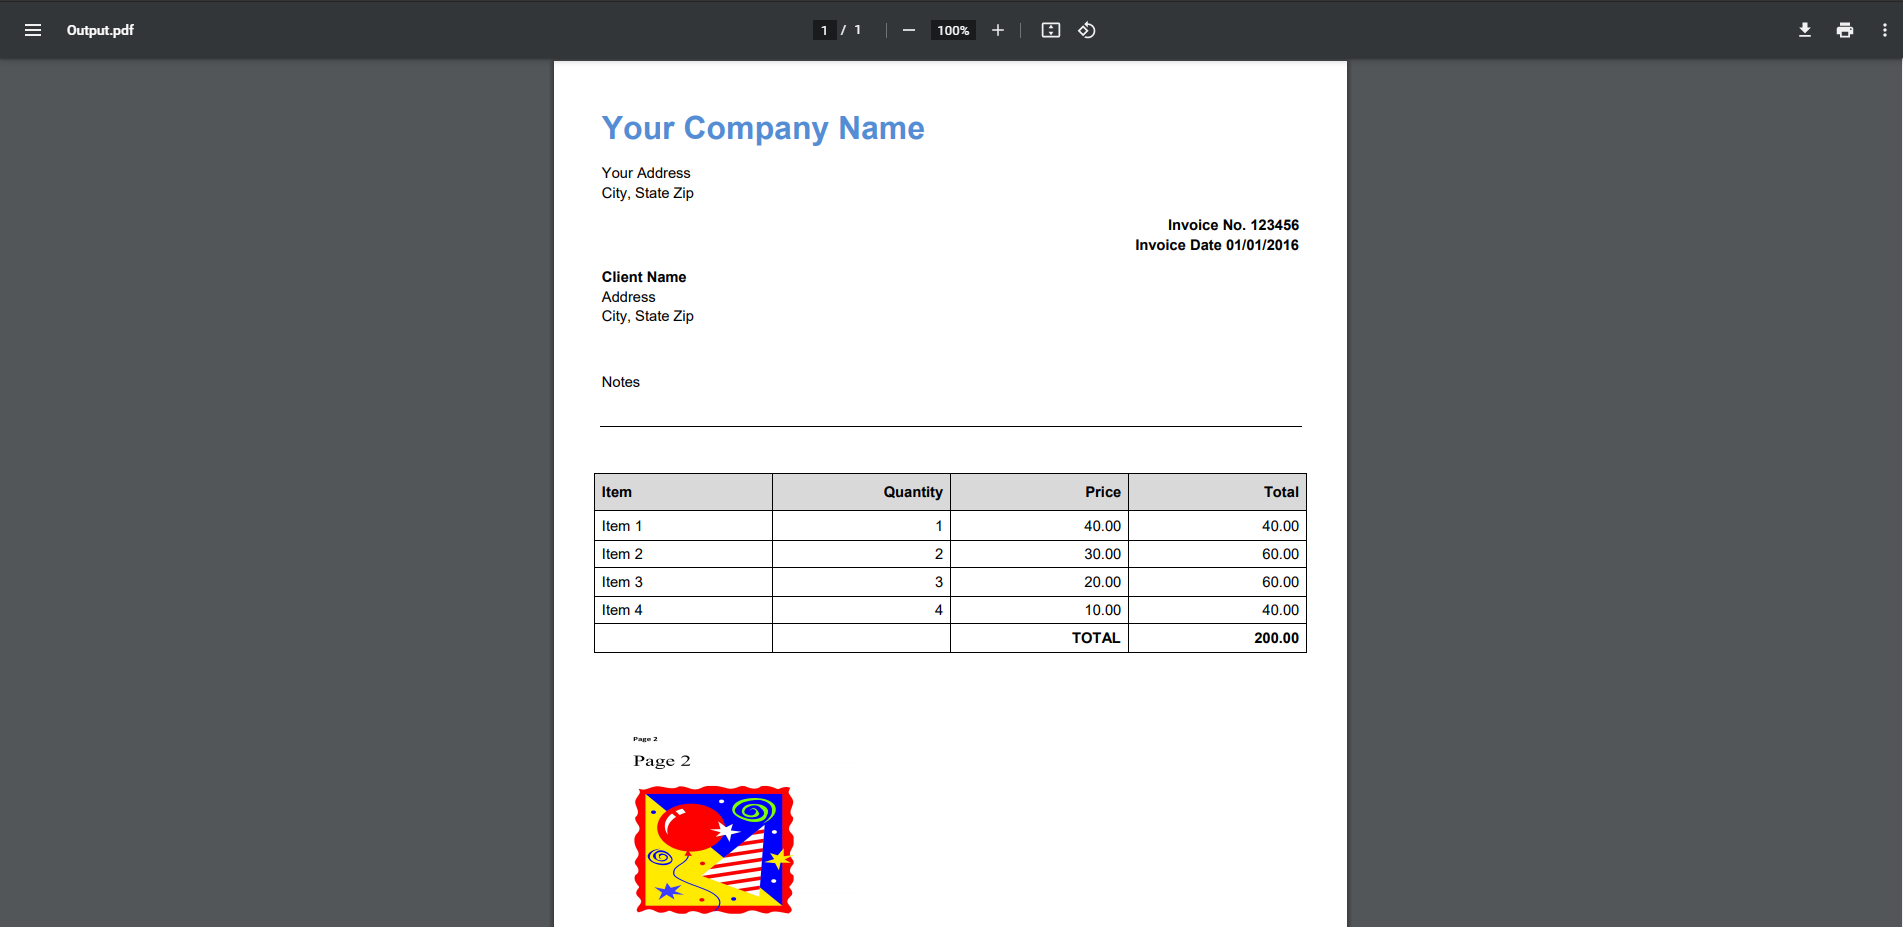 Screenshot of the Output PDF with the sample image on it